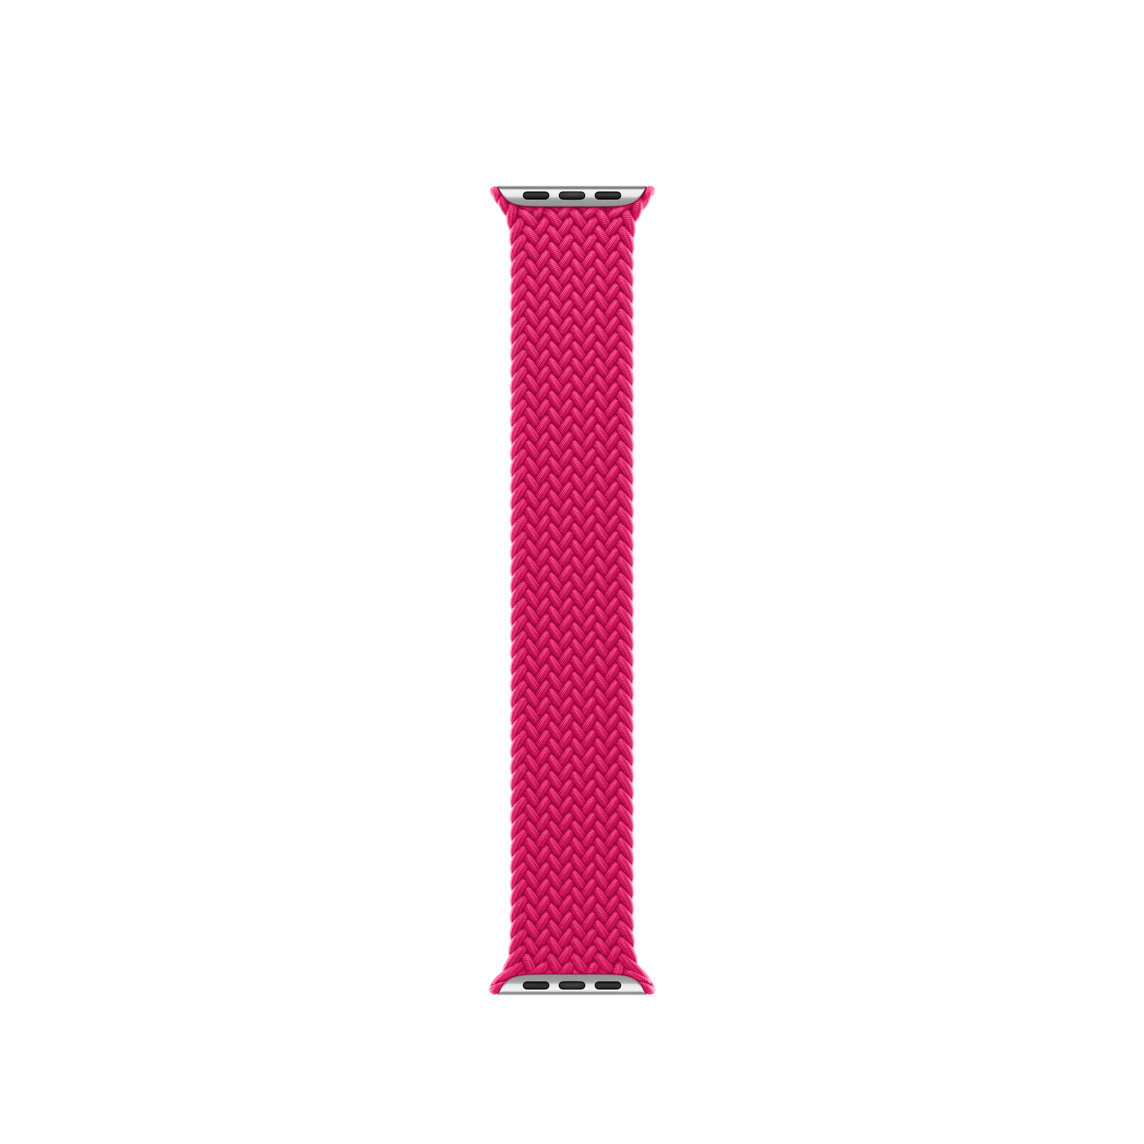 Raspberry Braided Solo Loop band, woven polyester and silicone threads with no clasps or buckles